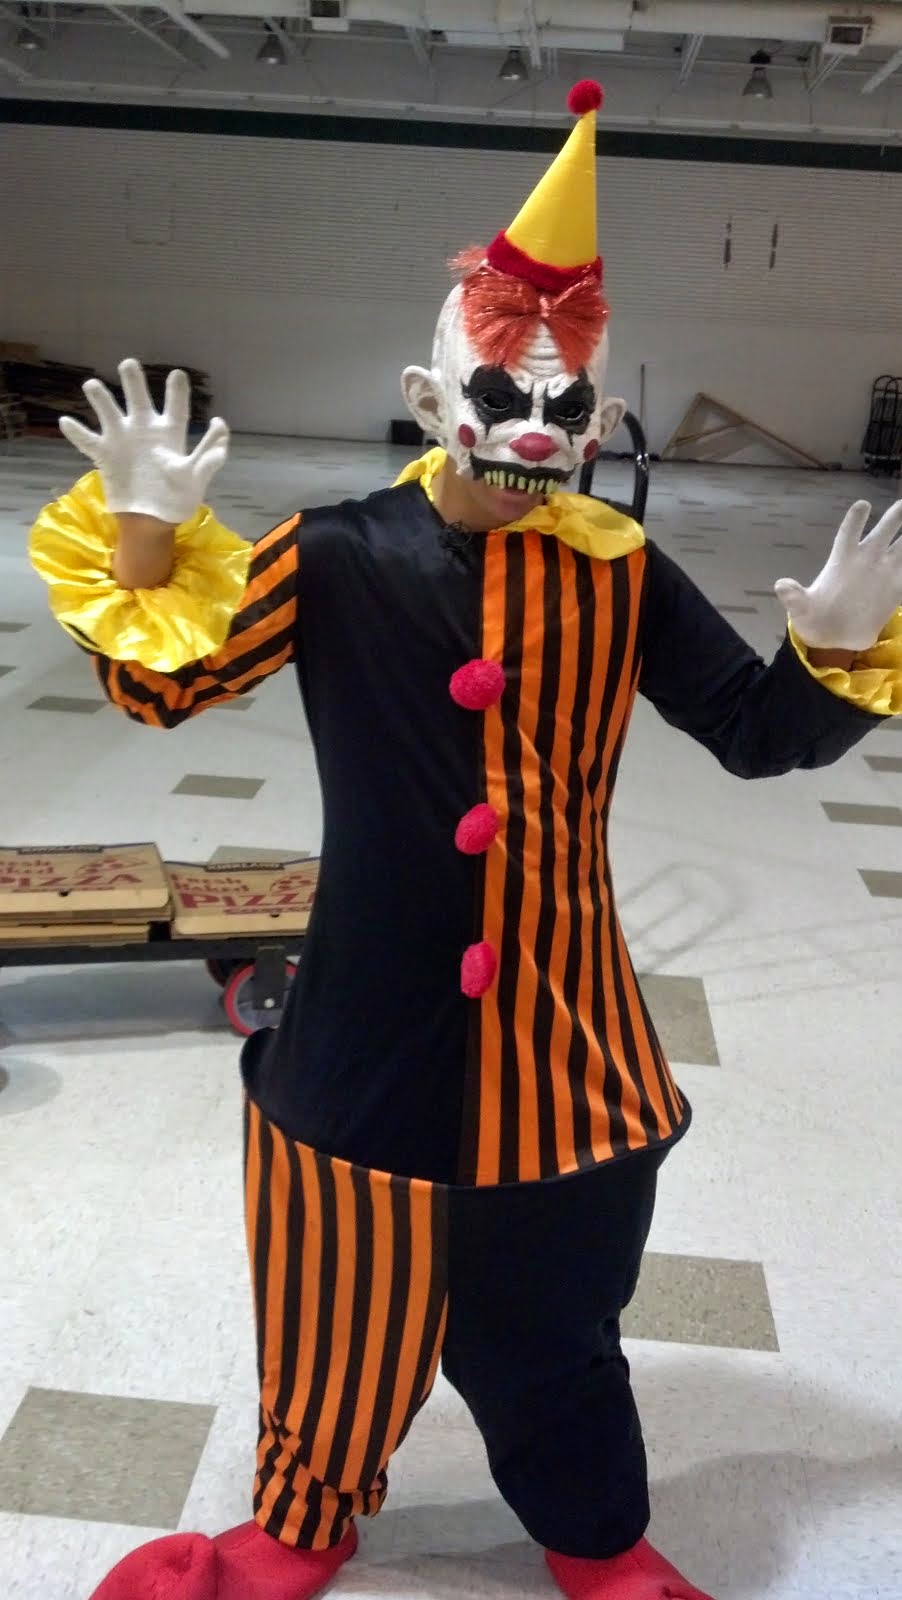 My version of Halloween...for people who hate clowns!!